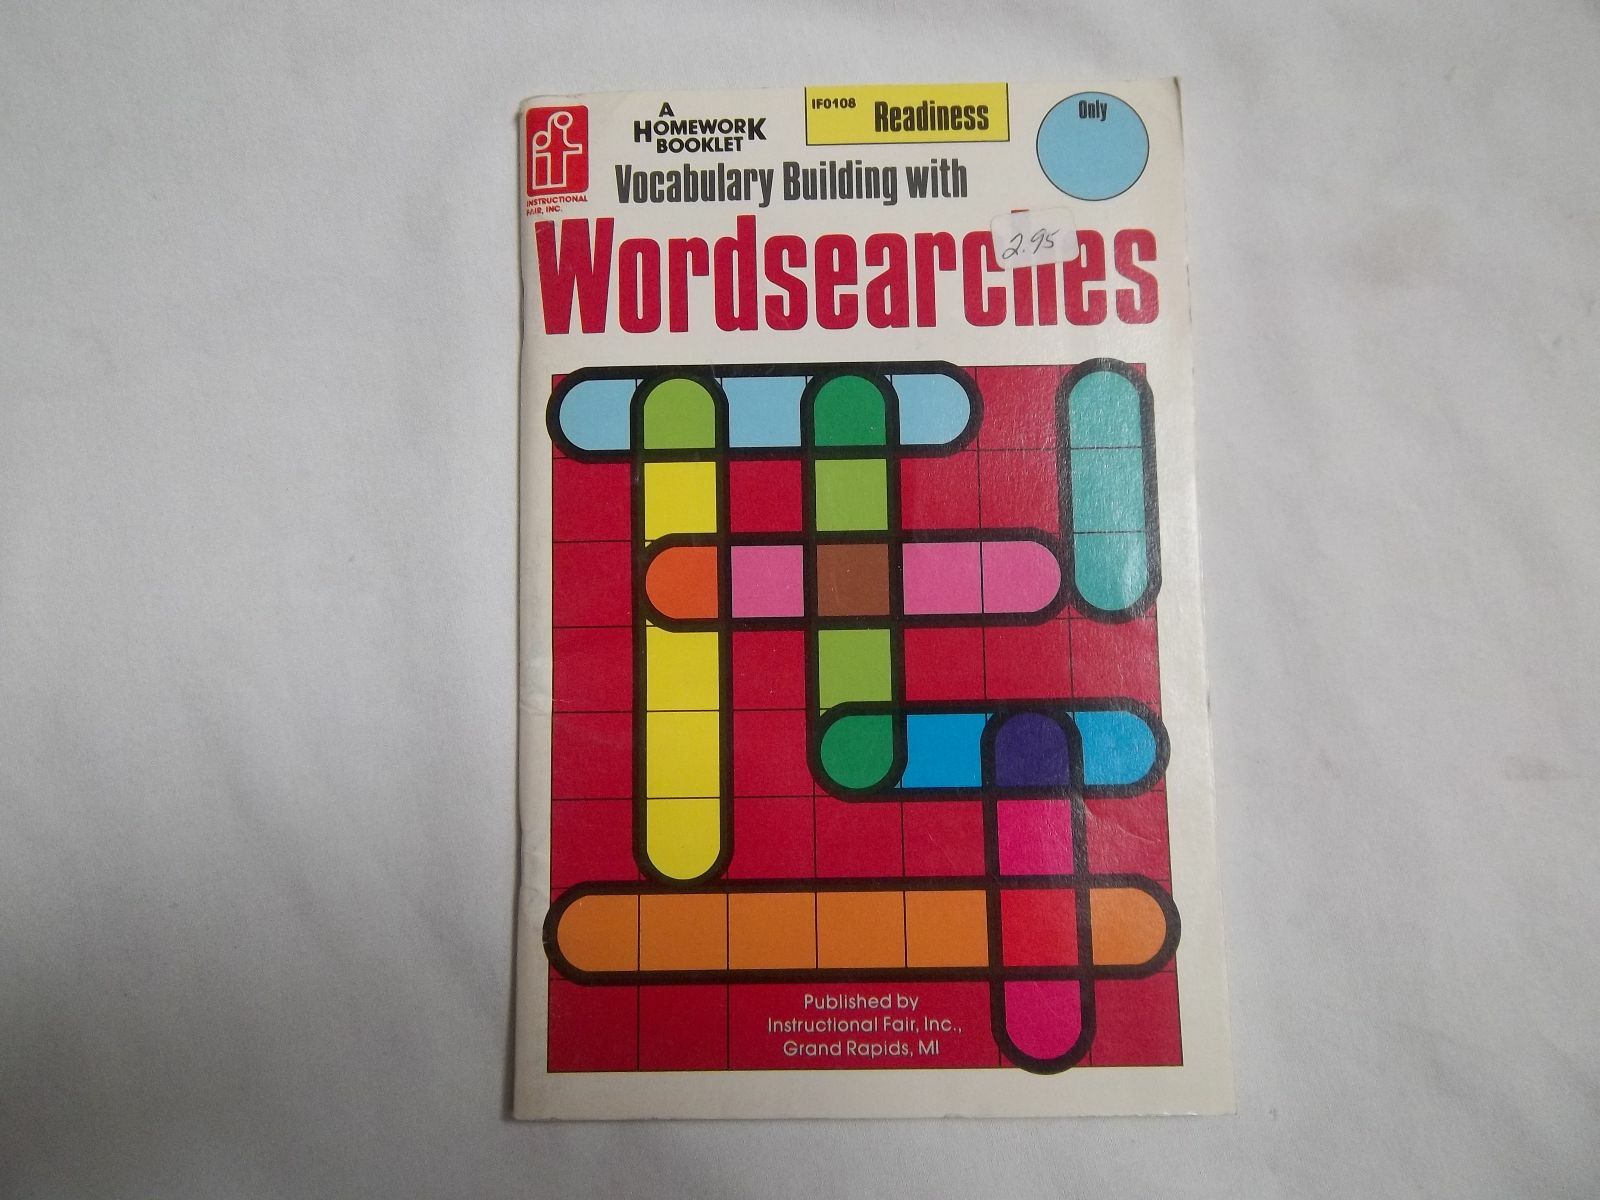 IF0107 VOCABULARY BUILDING WITH WORDSEARCHES A HOMEWORK BOOKLET (PAPERBACK)